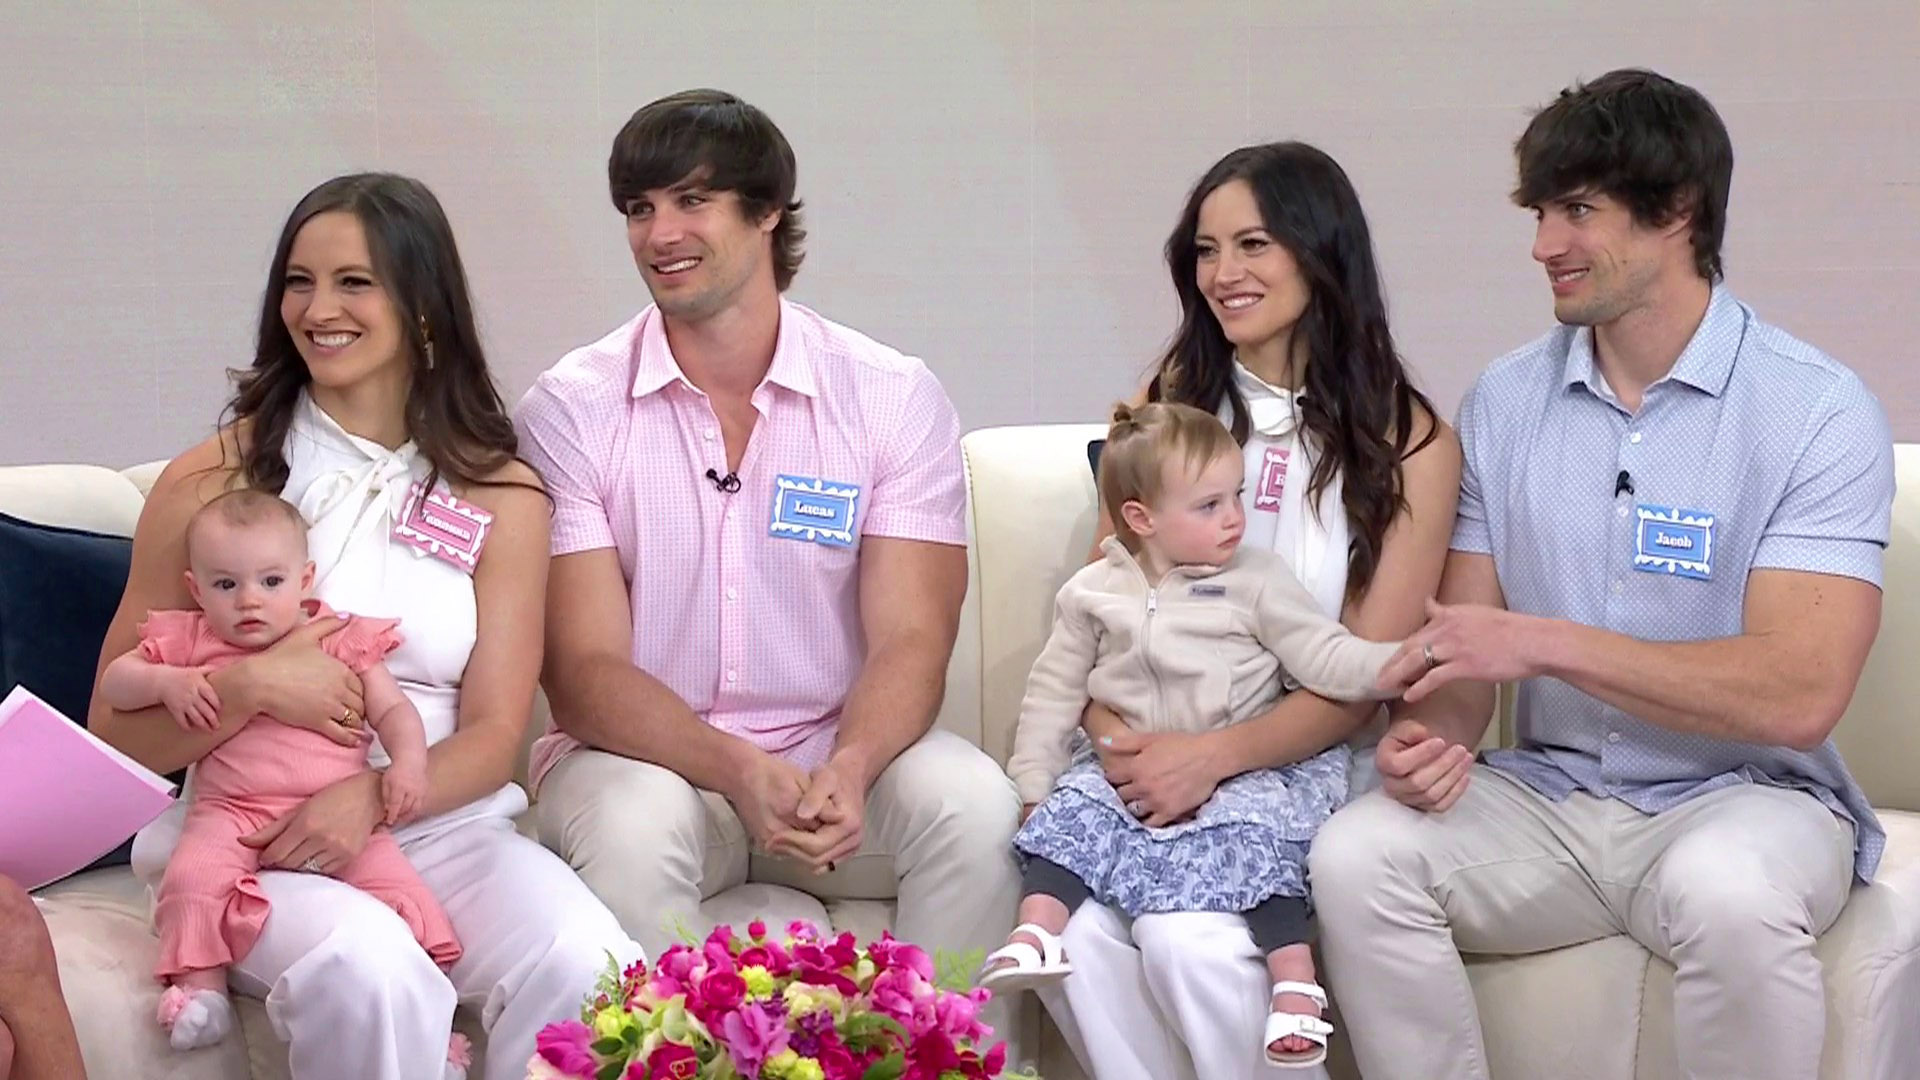 Seeing double: 2 sets of identical twins share love story on TODAY